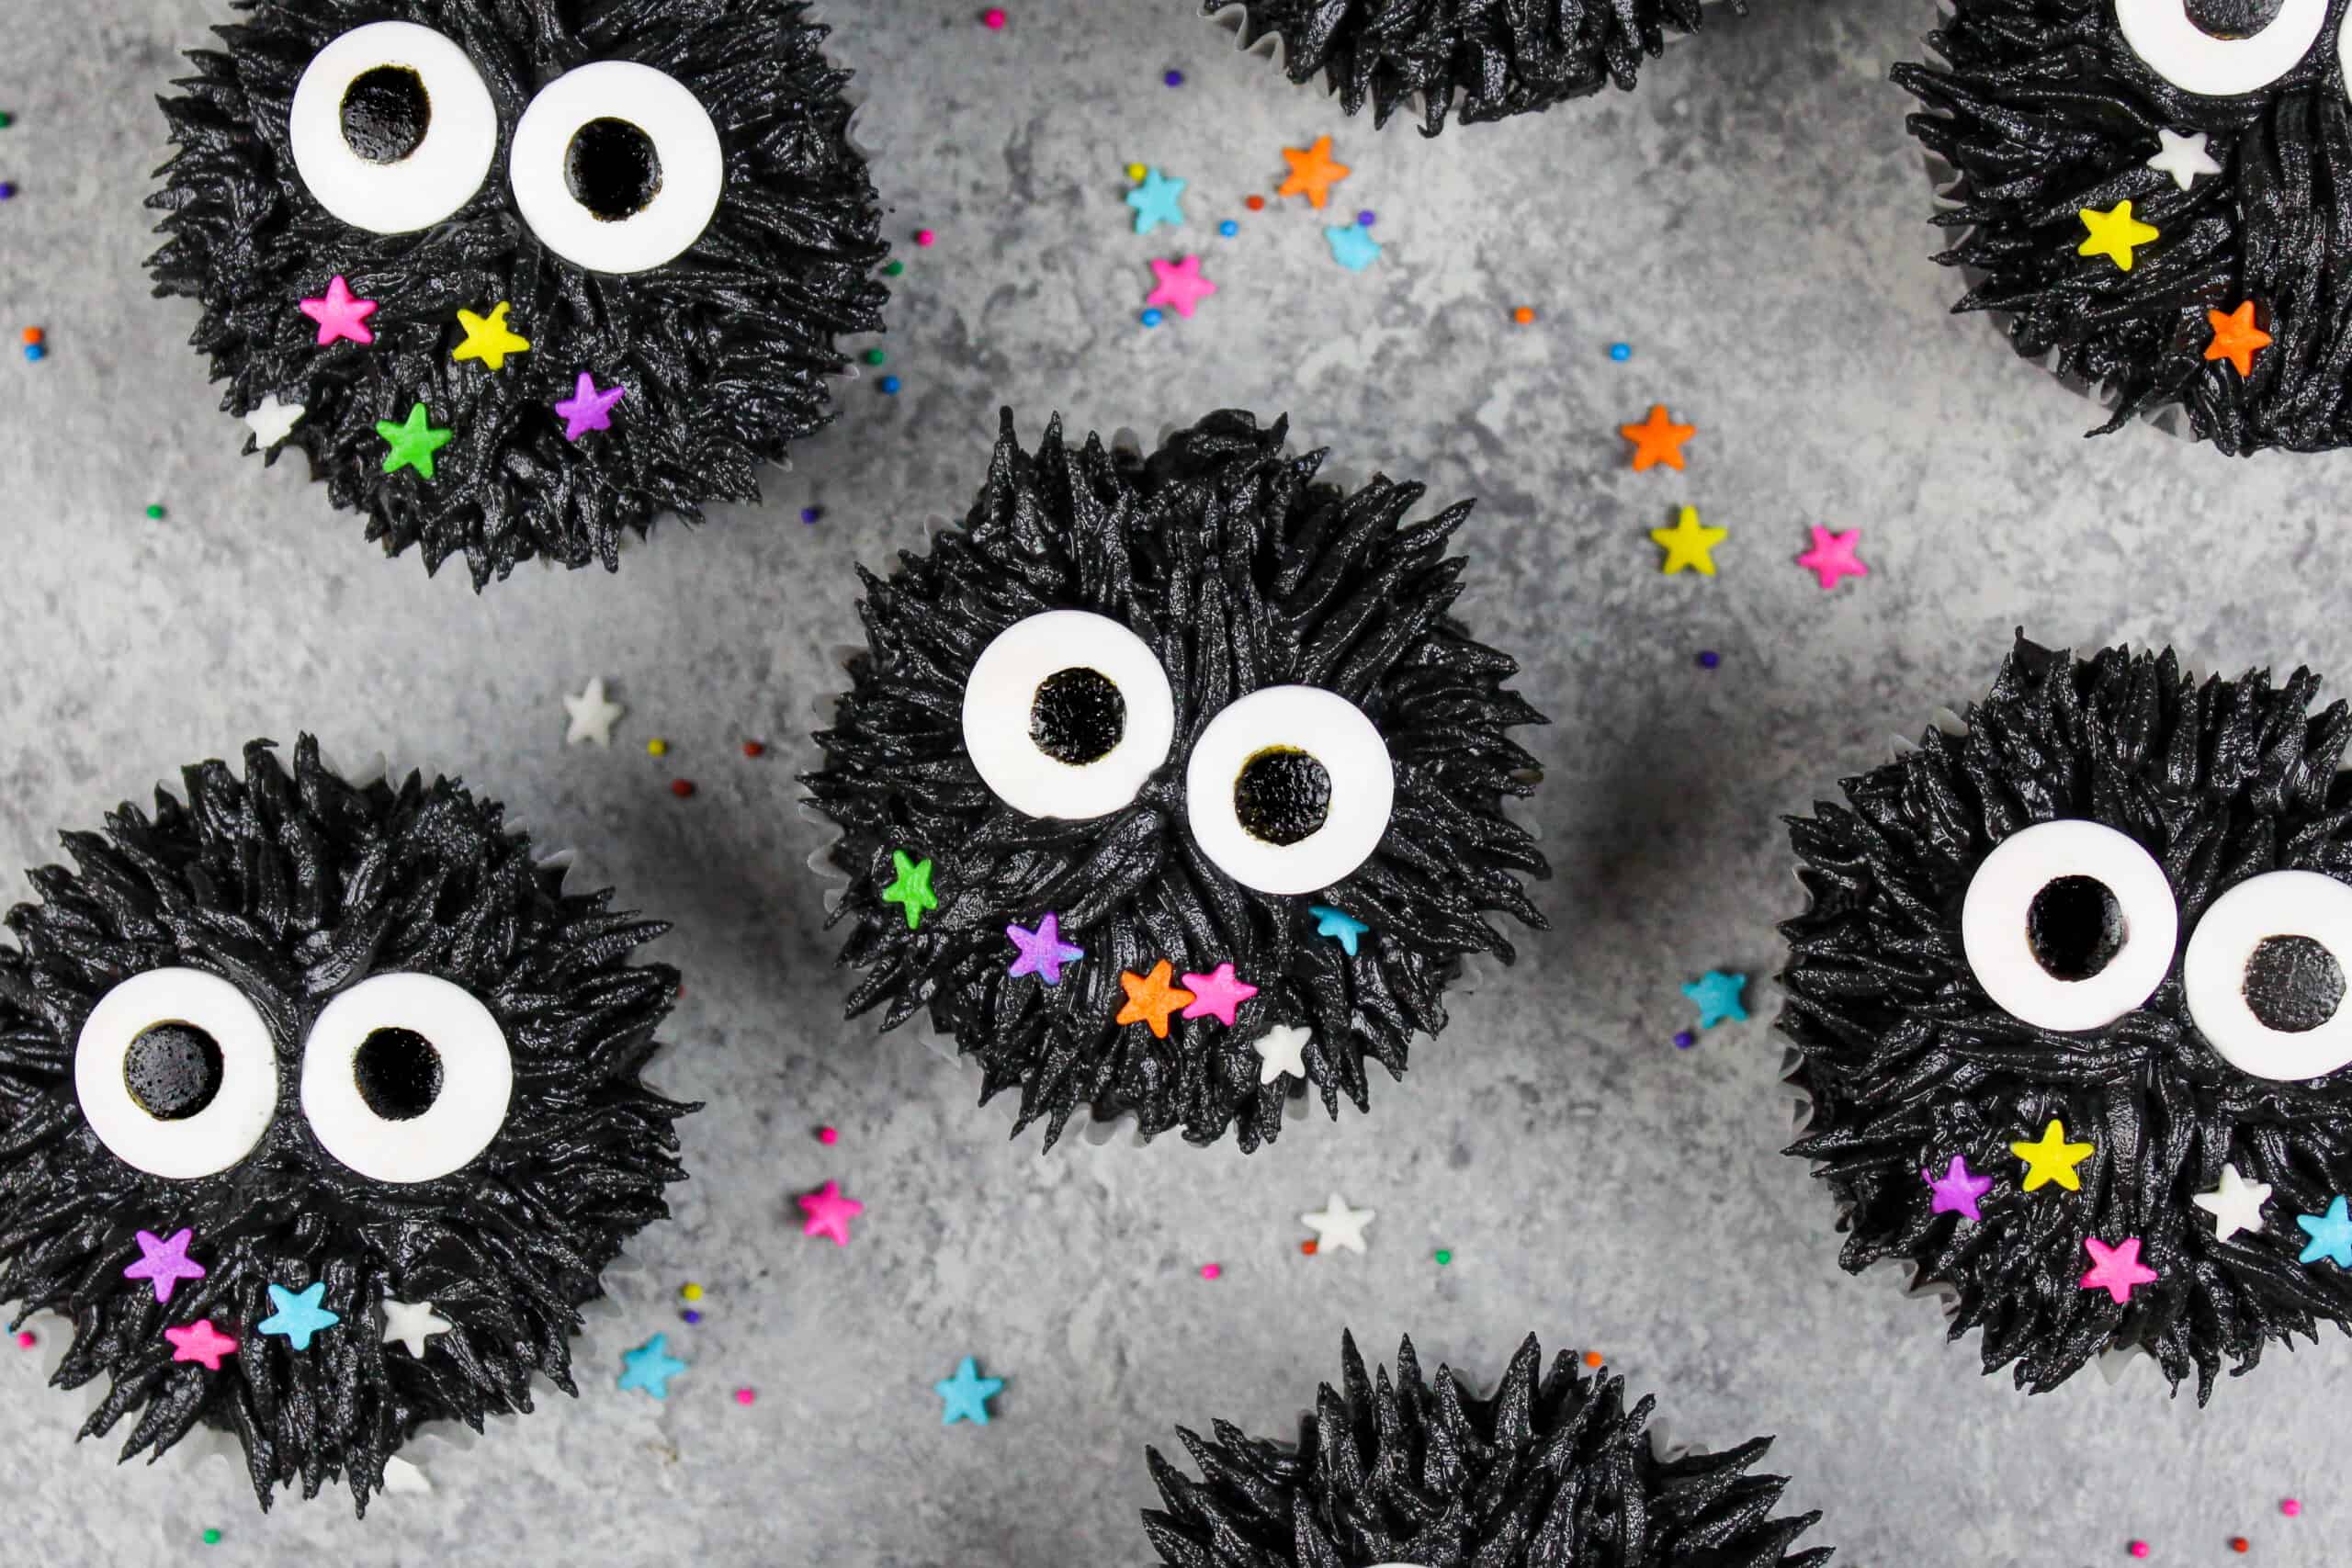 image of soot sprite cupcakes from spirited away and totoro